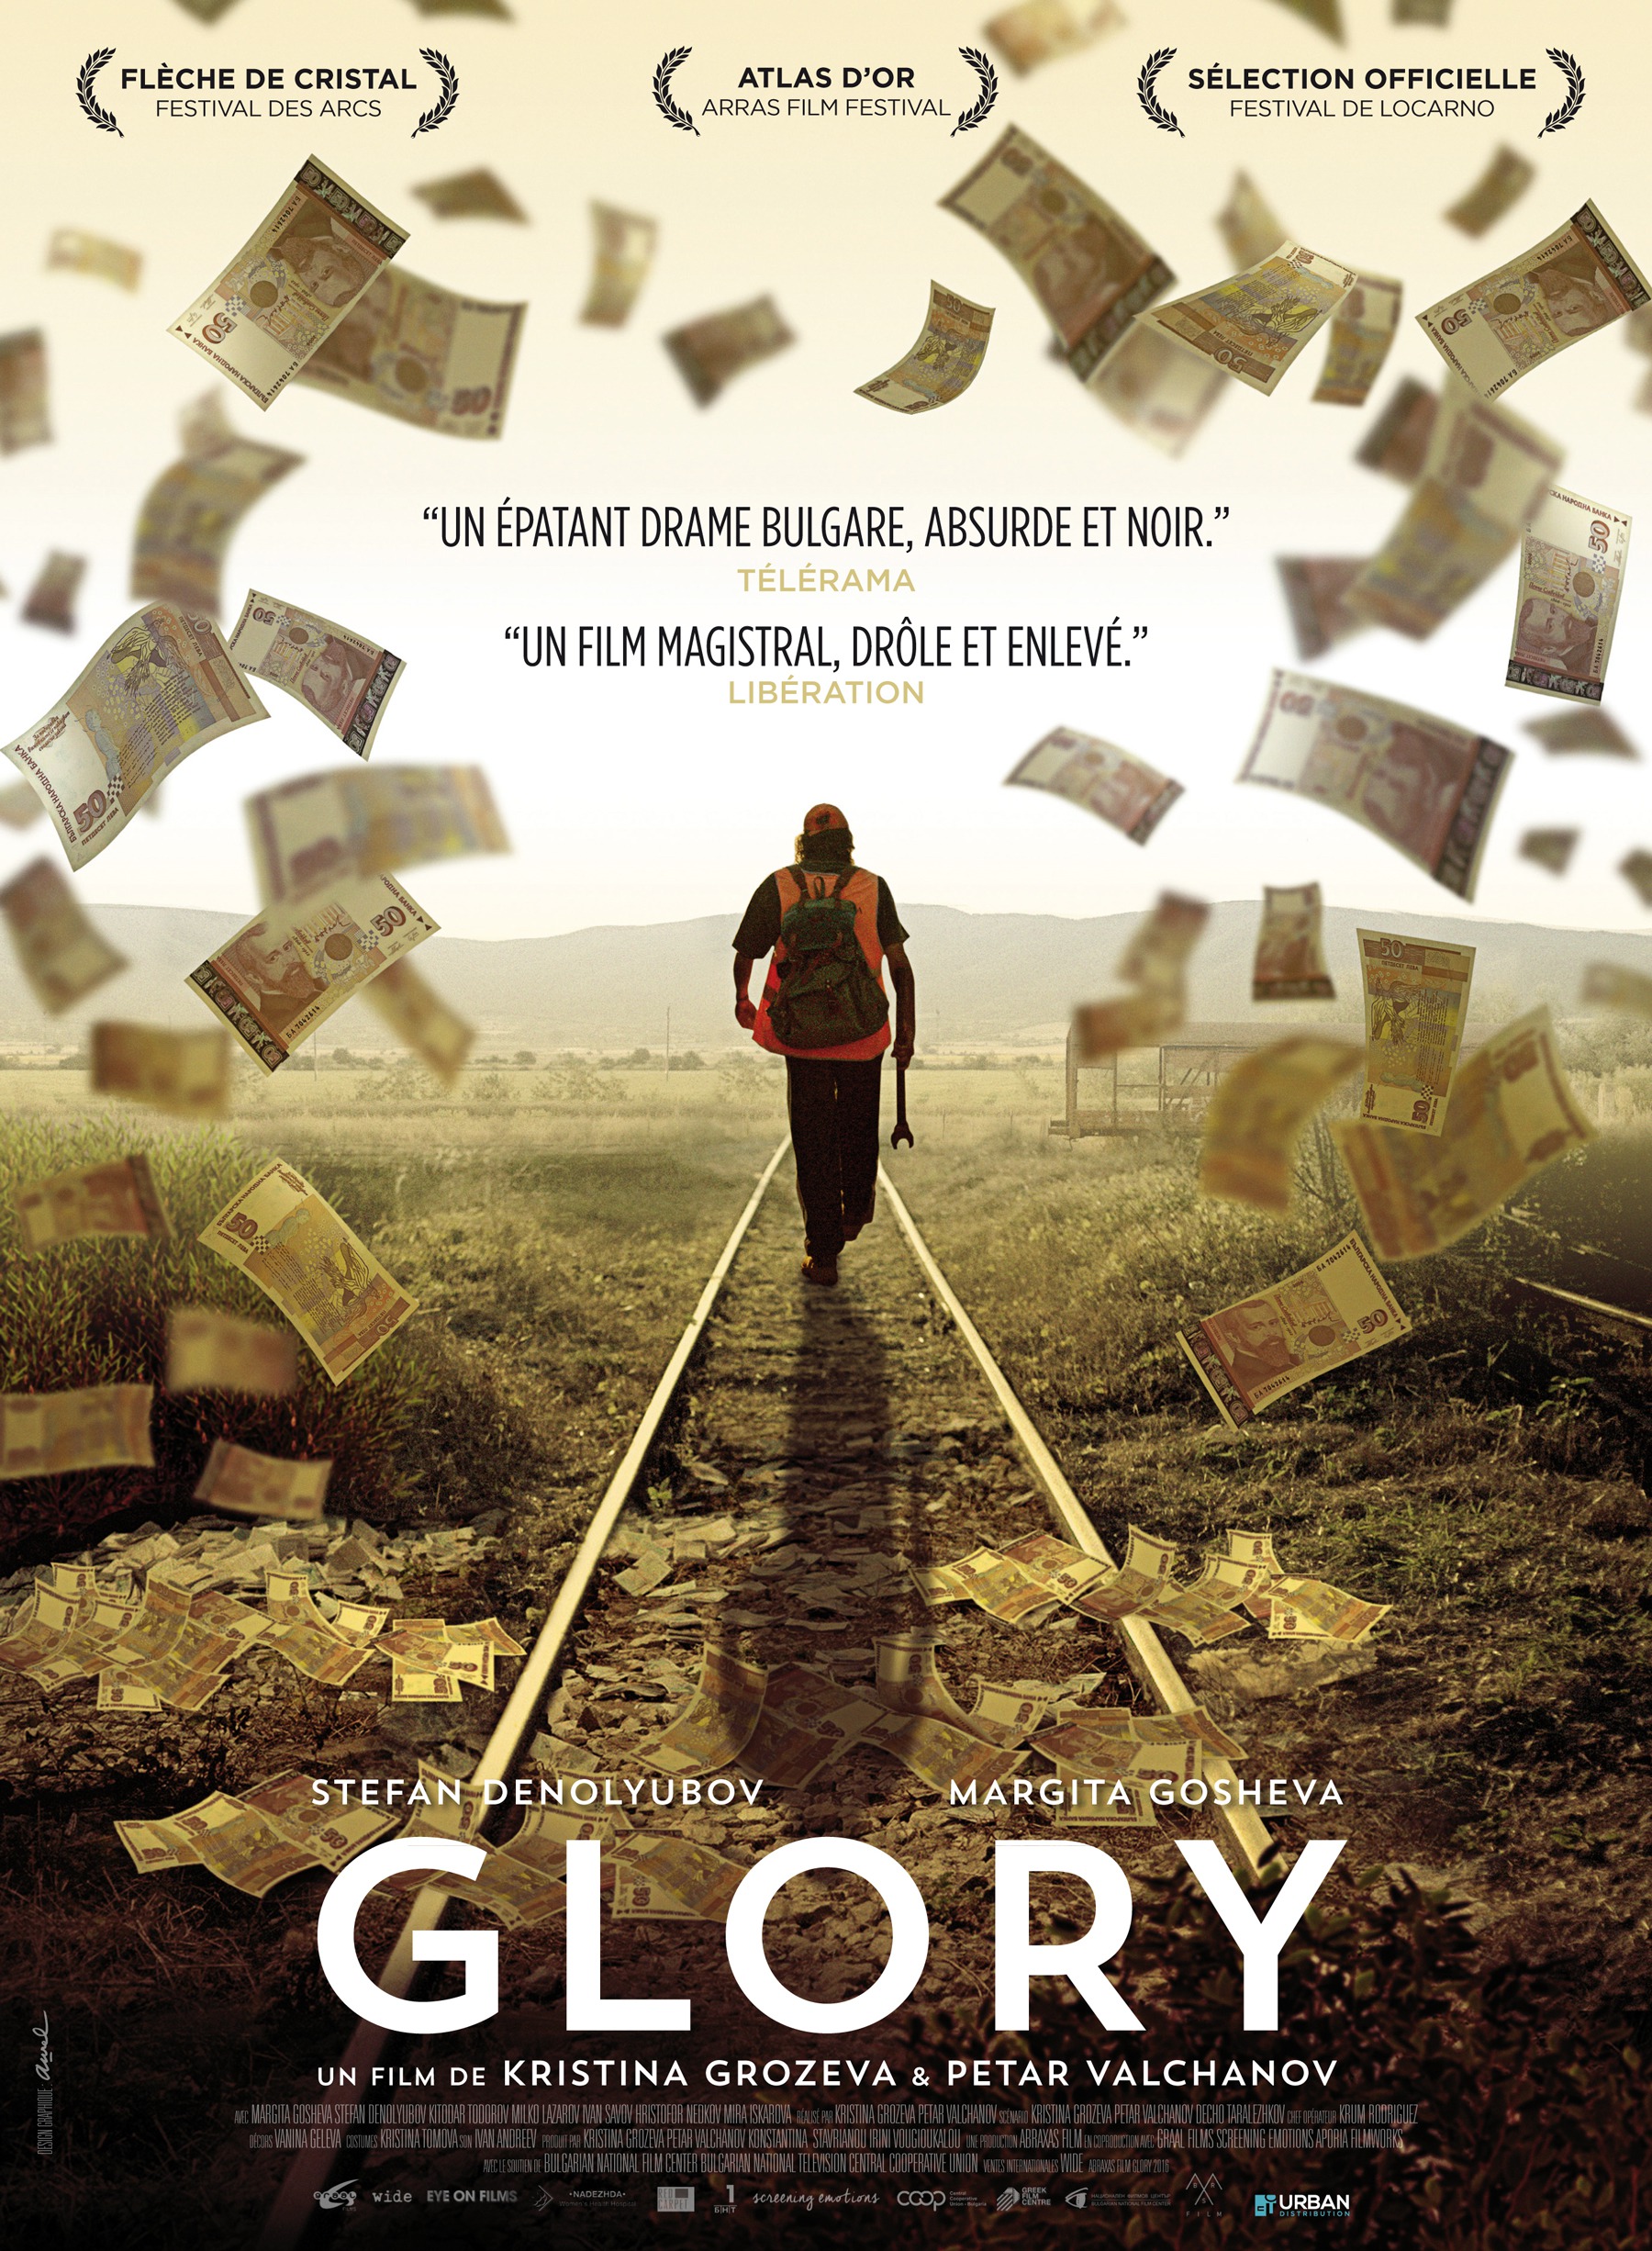 Mega Sized Movie Poster Image for Glory (#2 of 2)